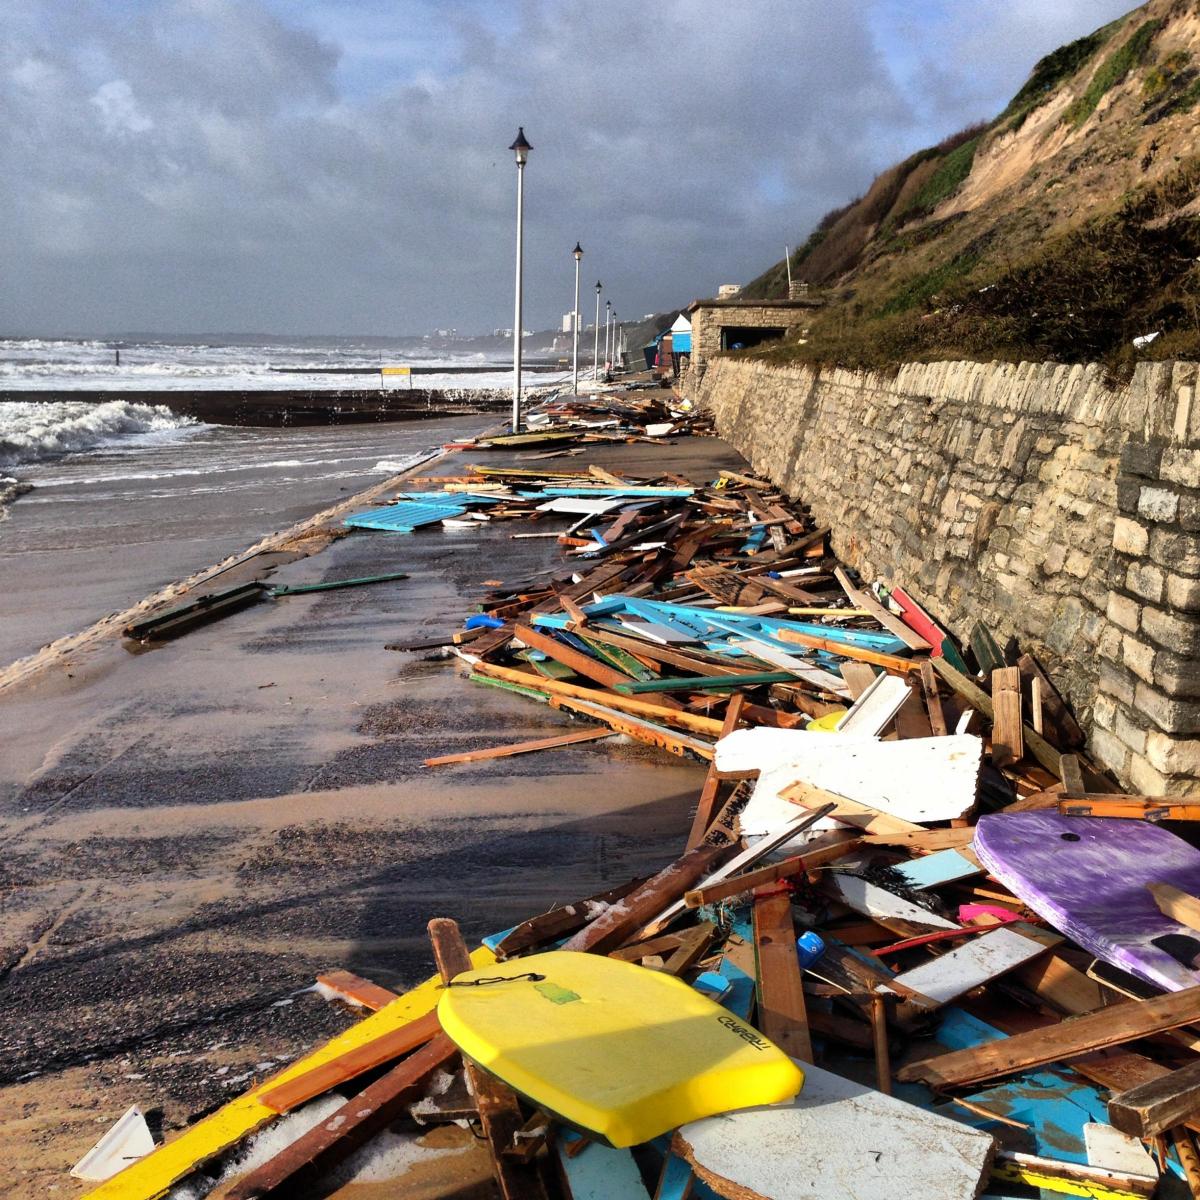 Daily Echo reader photos of the storm and damage left behind after severe weather swept through Dorset on February 14 and February 15. Picture taken by Georgia Turner at Southbourne